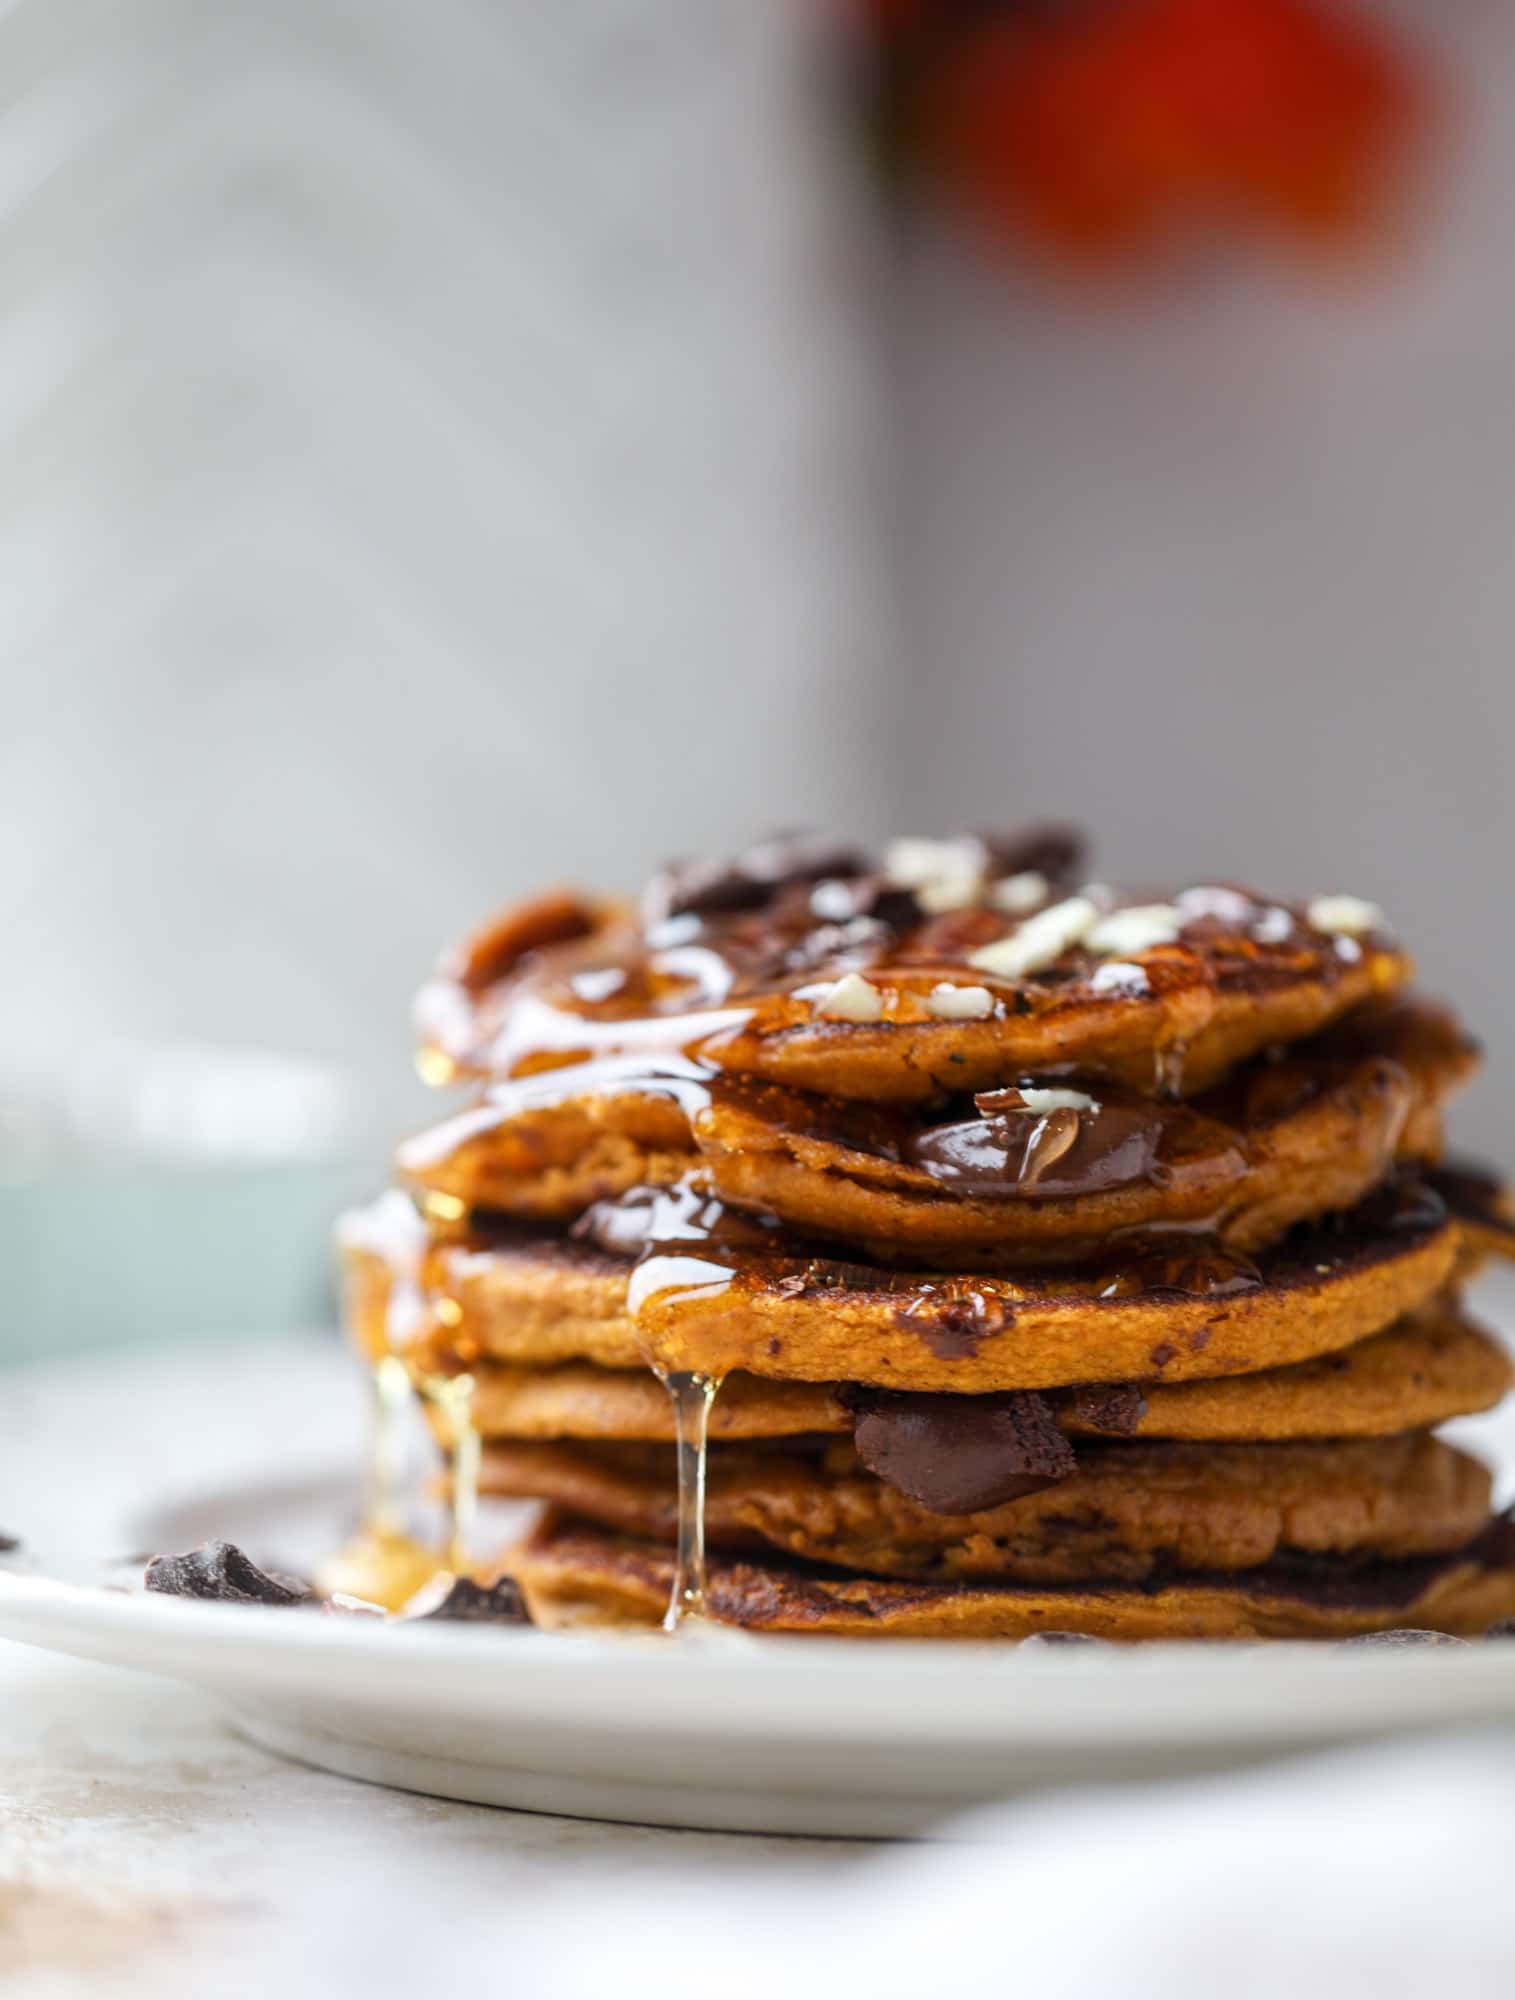 These pumpkin protein pancakes are packed with delicious ingredients to make a healthy and satisfying fall breakfast! They are super easy - you throw everything into a blender to create the most incredible protein pancakes! I howsweeteats.com #protein #pancakes #pumpkin #breakfast #fall